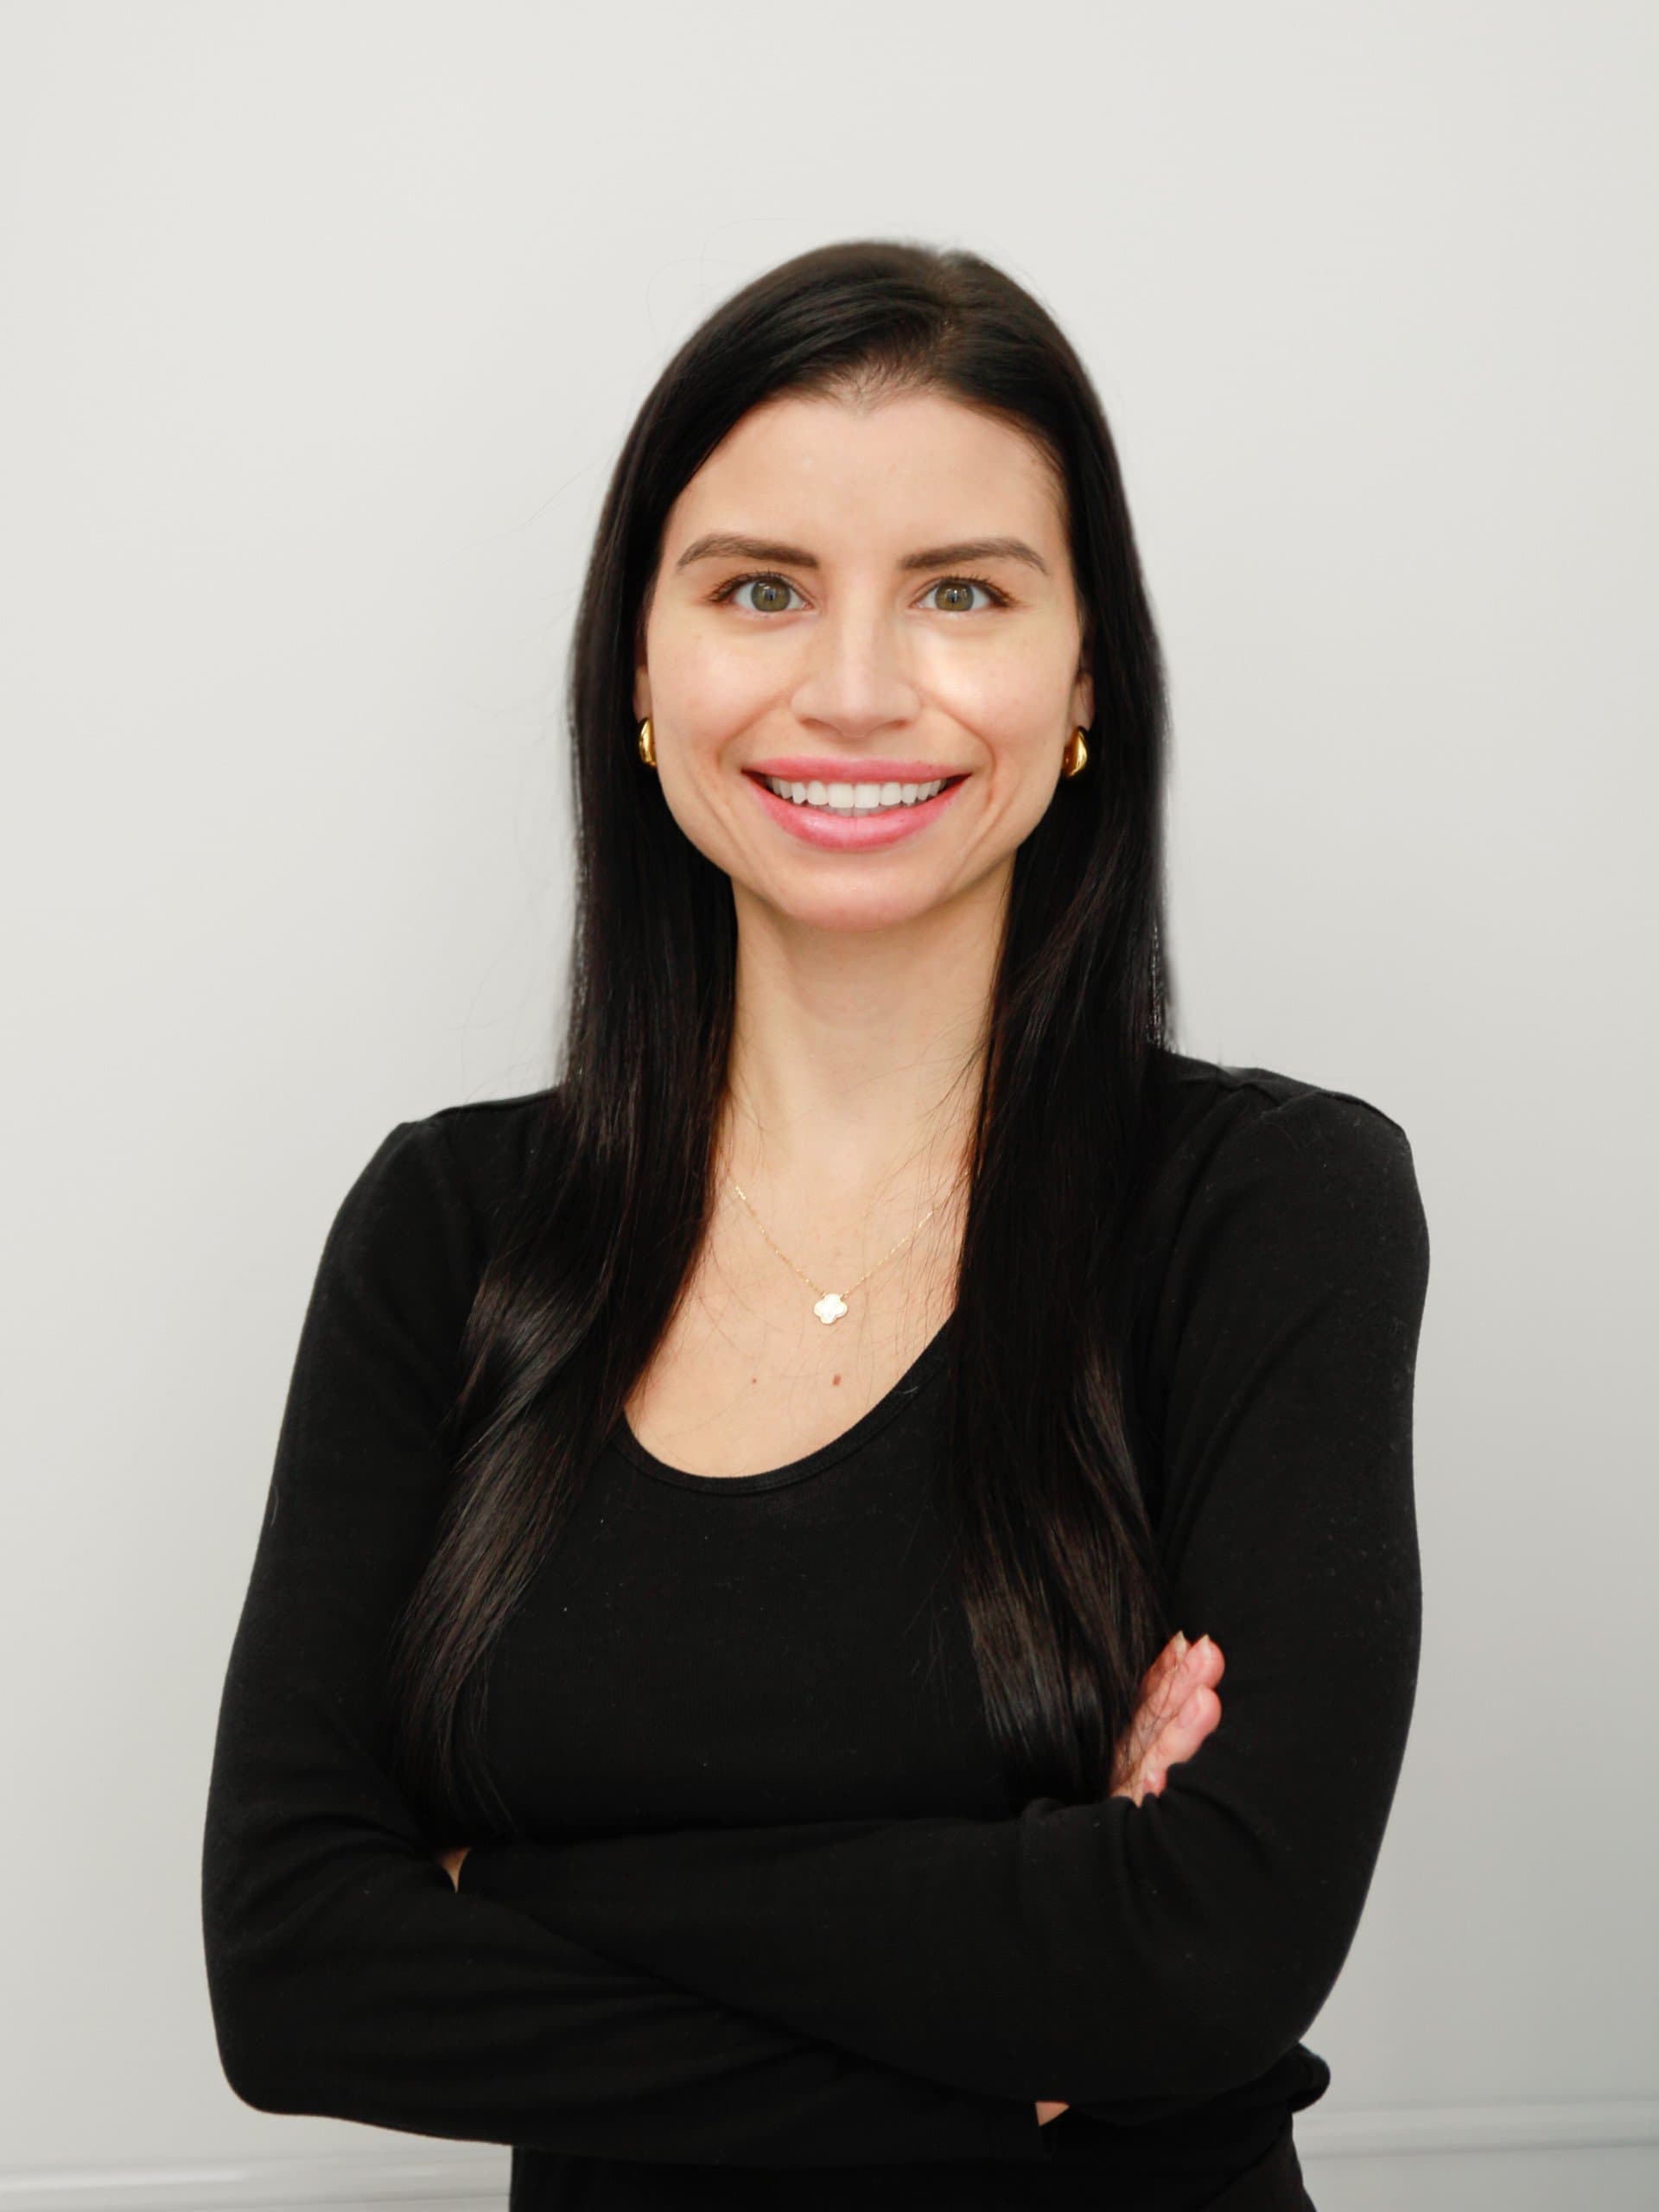 Samantha Criscione, Medical Aesthetician and Laser Specialist